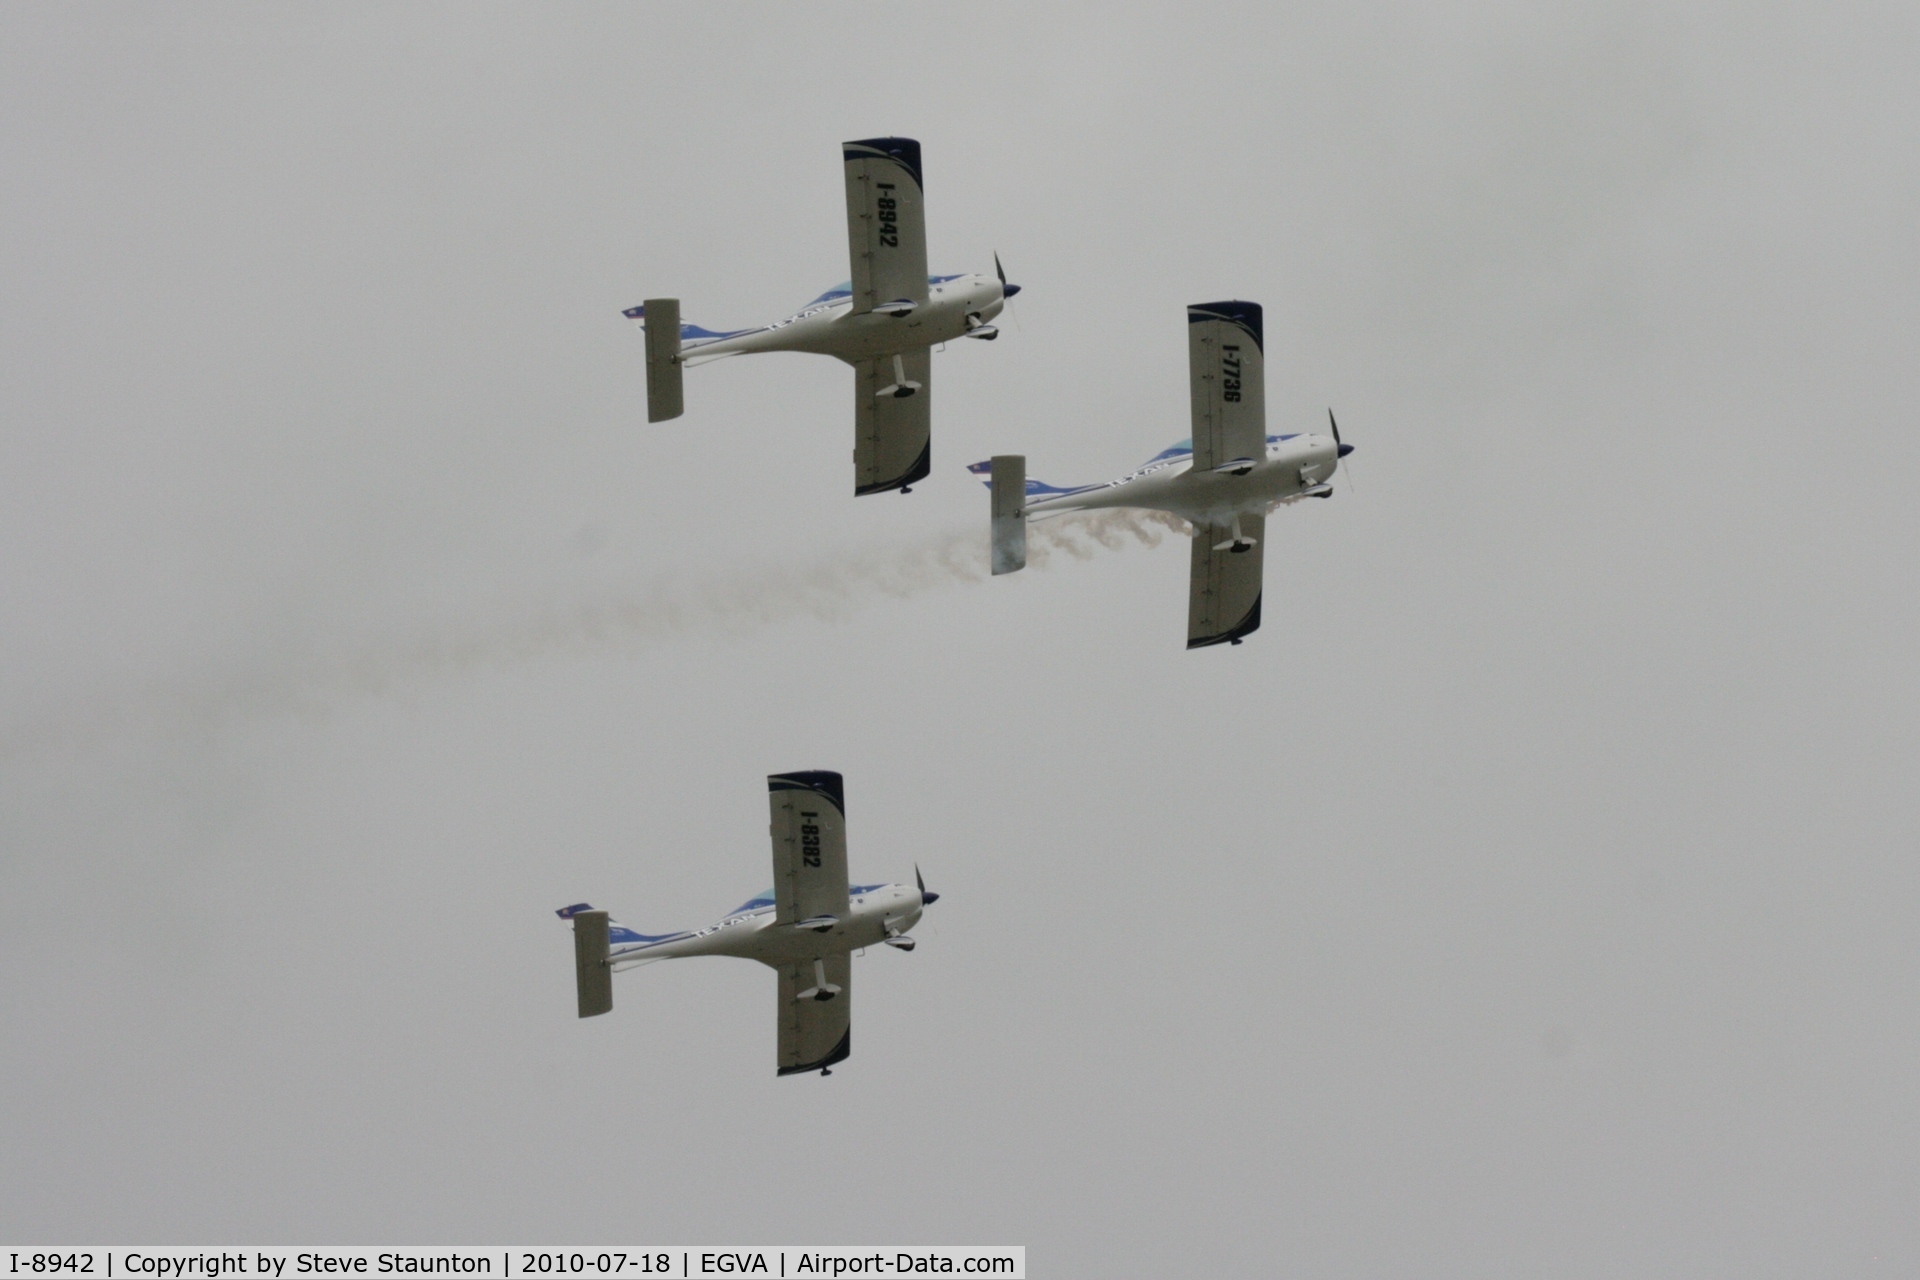 I-8942, Fly Synthesis Texan Top Class 450 C/N Not found I-8942, Texan Team, three disabed pilots flying close formation in these ultra lights - taken at the Royal International Air Tattoo 2010